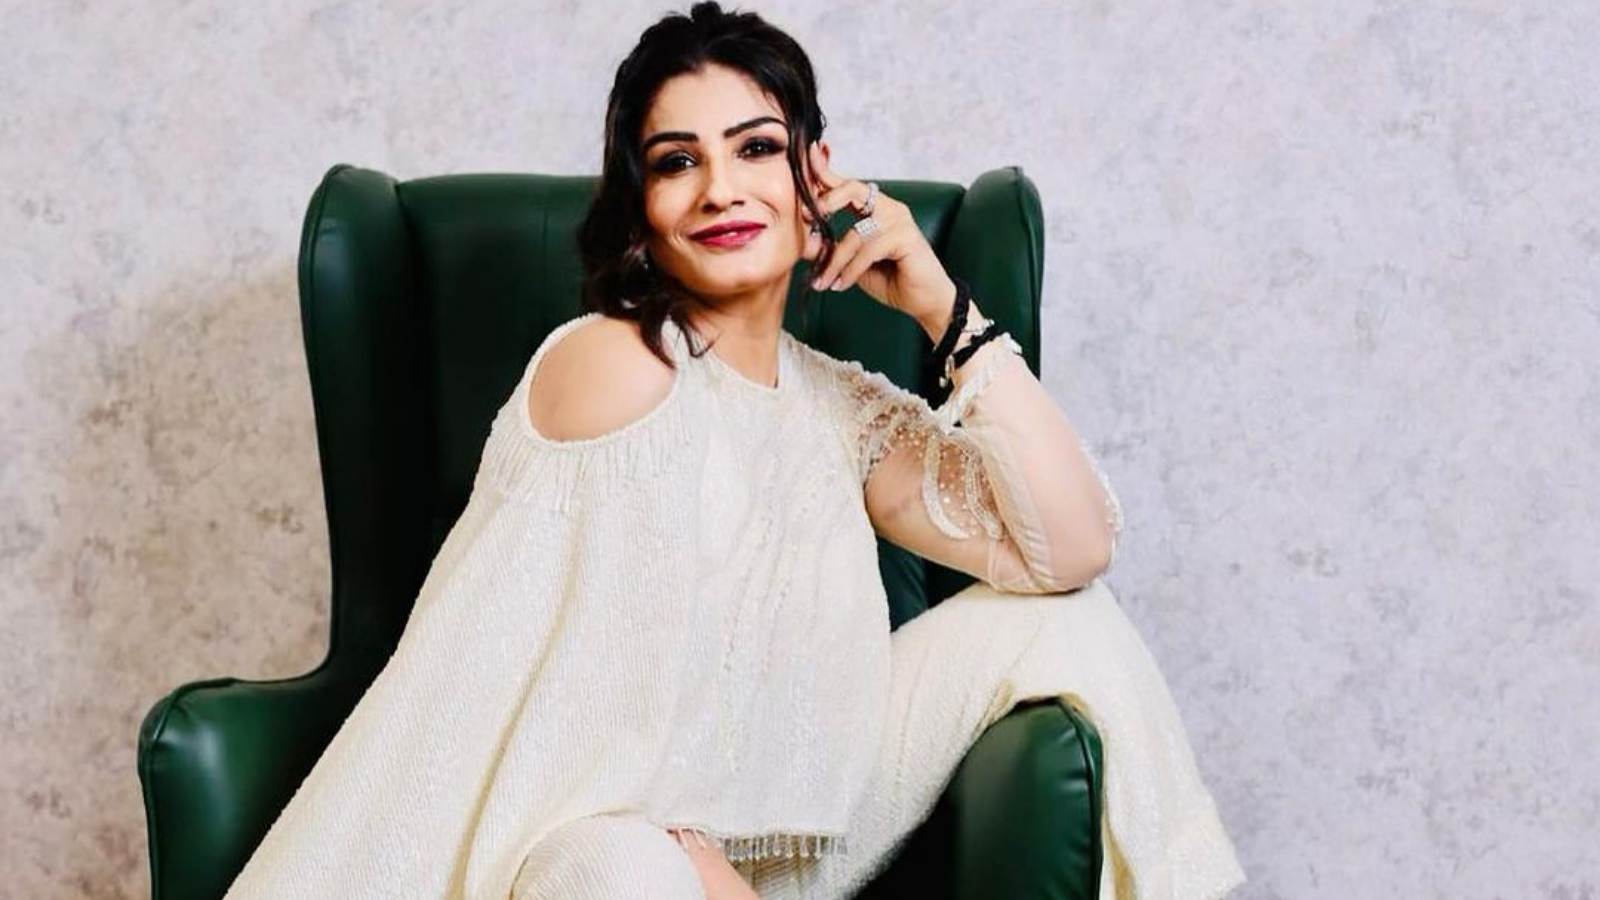 Rveena Tandon K Xxx Hindi Video - Raveena Tandon says South film industry doesn't make 'elitist' films while  Hindi movies have become 'westernised': 'They have started making DVD  copiesâ€¦' | Bollywood News - The Indian Express